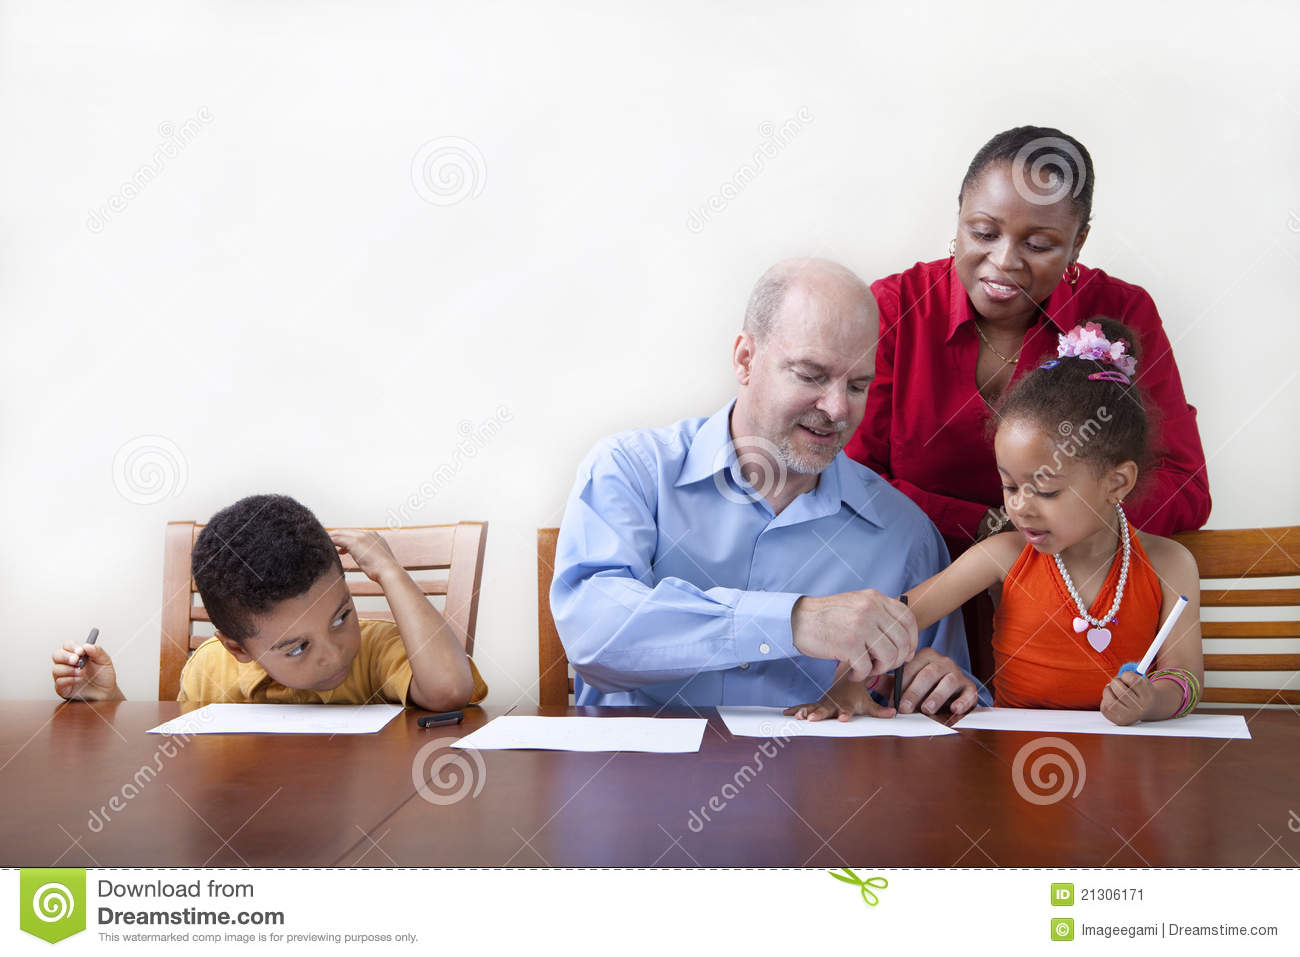 Quality Family Time Stock Image   Image  21306171